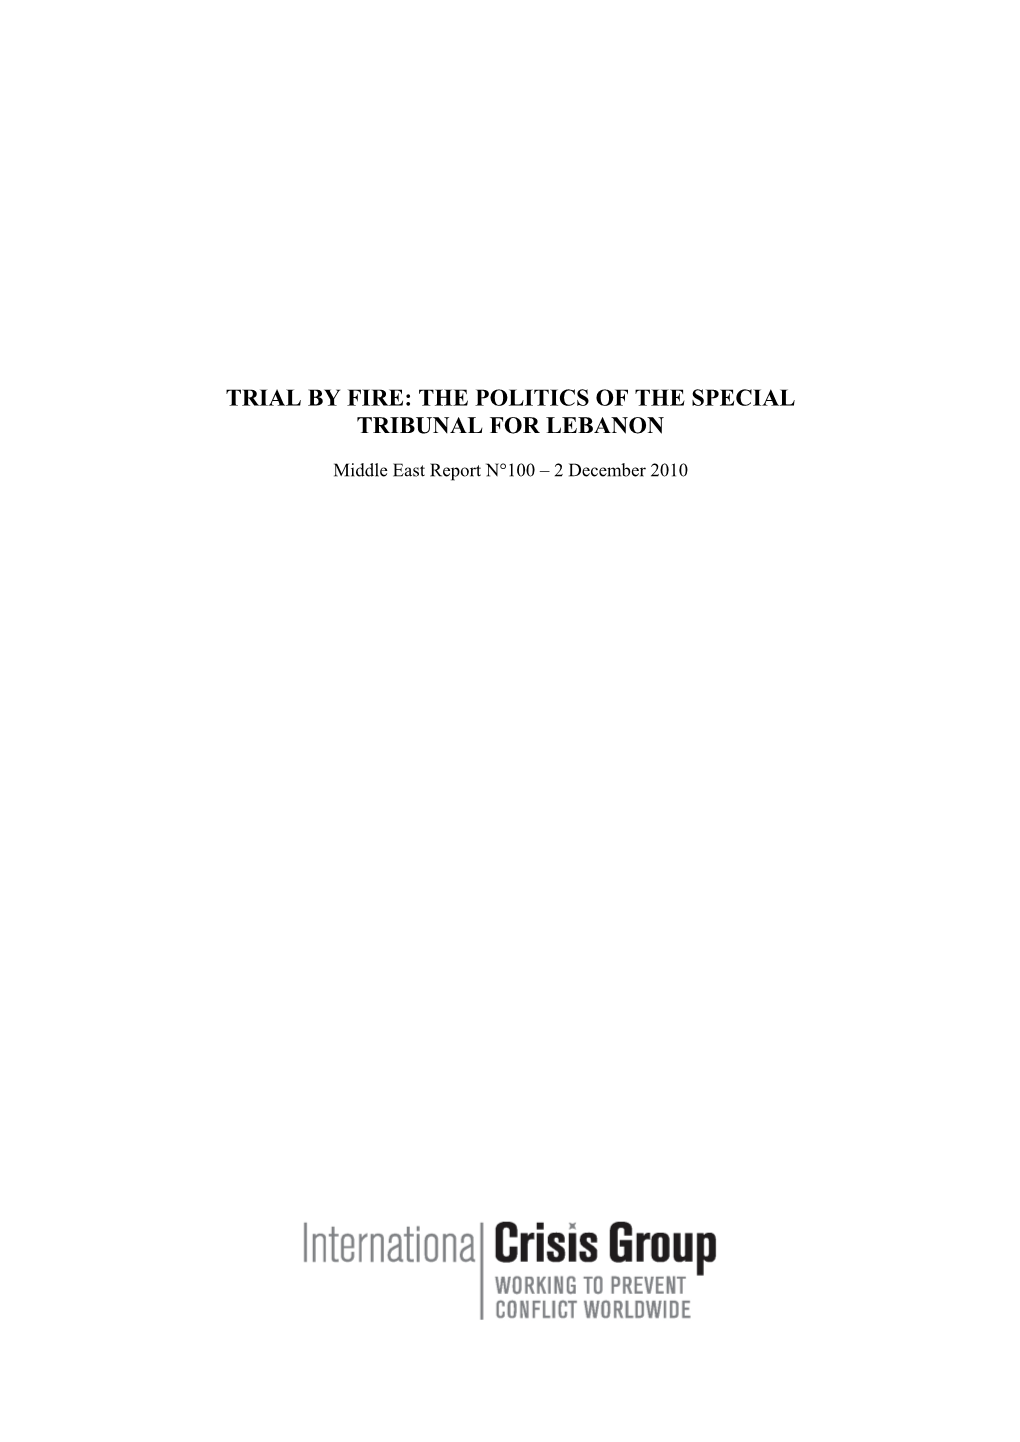 Trial by Fire: the Politics of the Special Tribunal for Lebanon